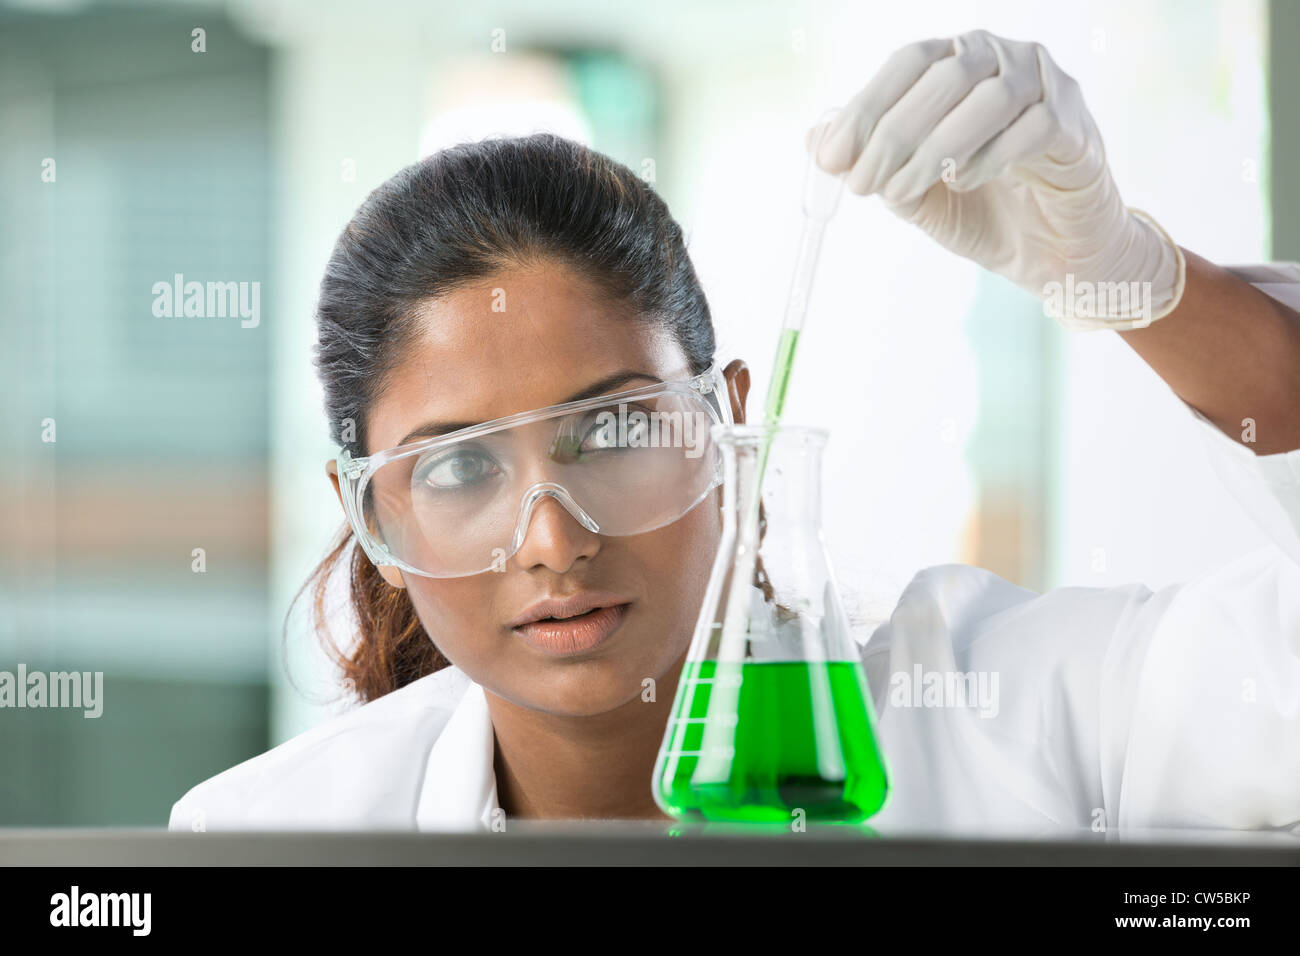 Woman scientist analyzing a solution. Stock Photo